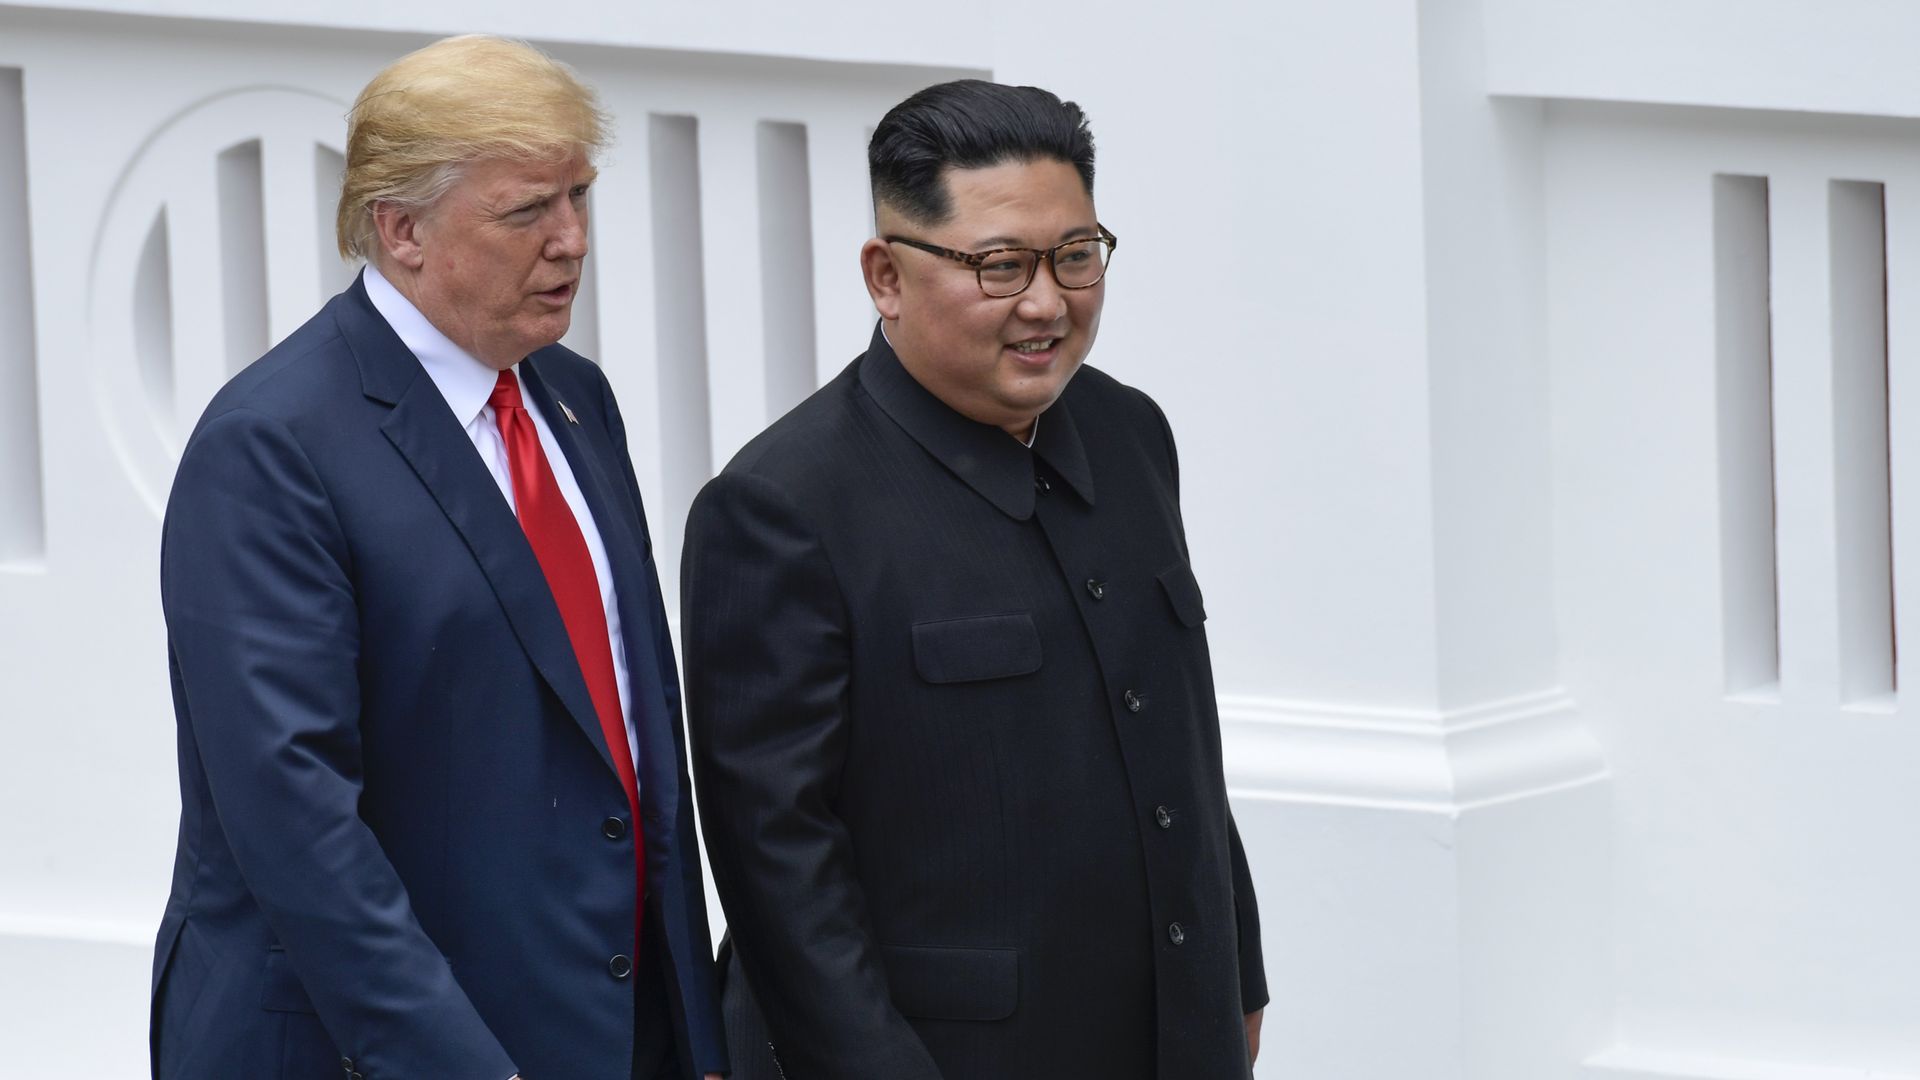 US President Donald Trump and North Korea leader Kim Jong Un walk from lunch at the Capella resort on Sentosa Island in Singapore